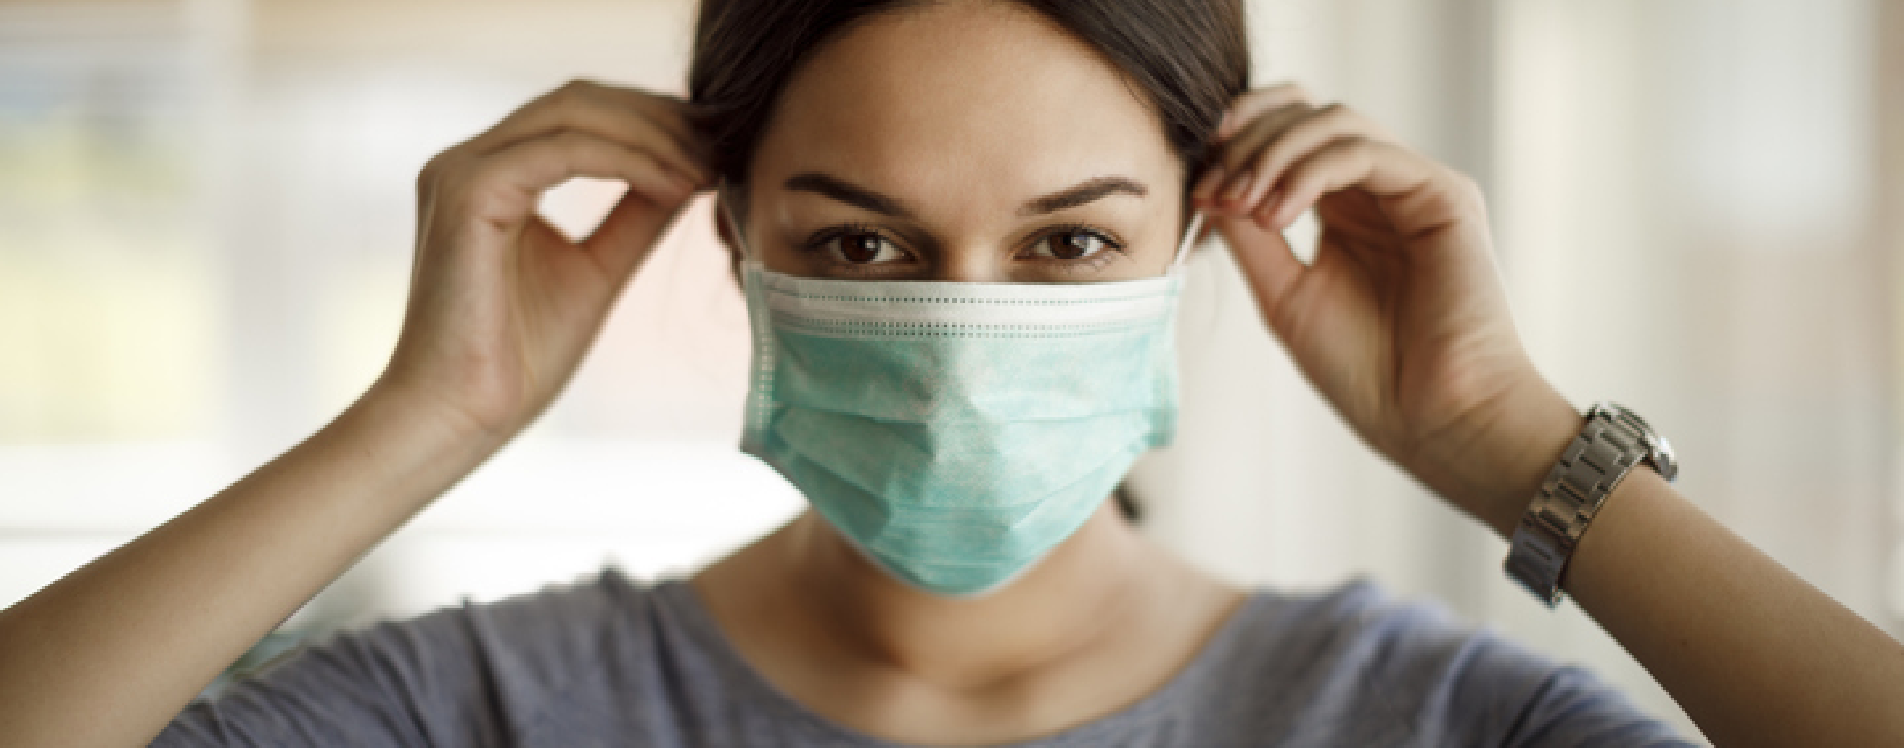 A woman putting on a surgical mask